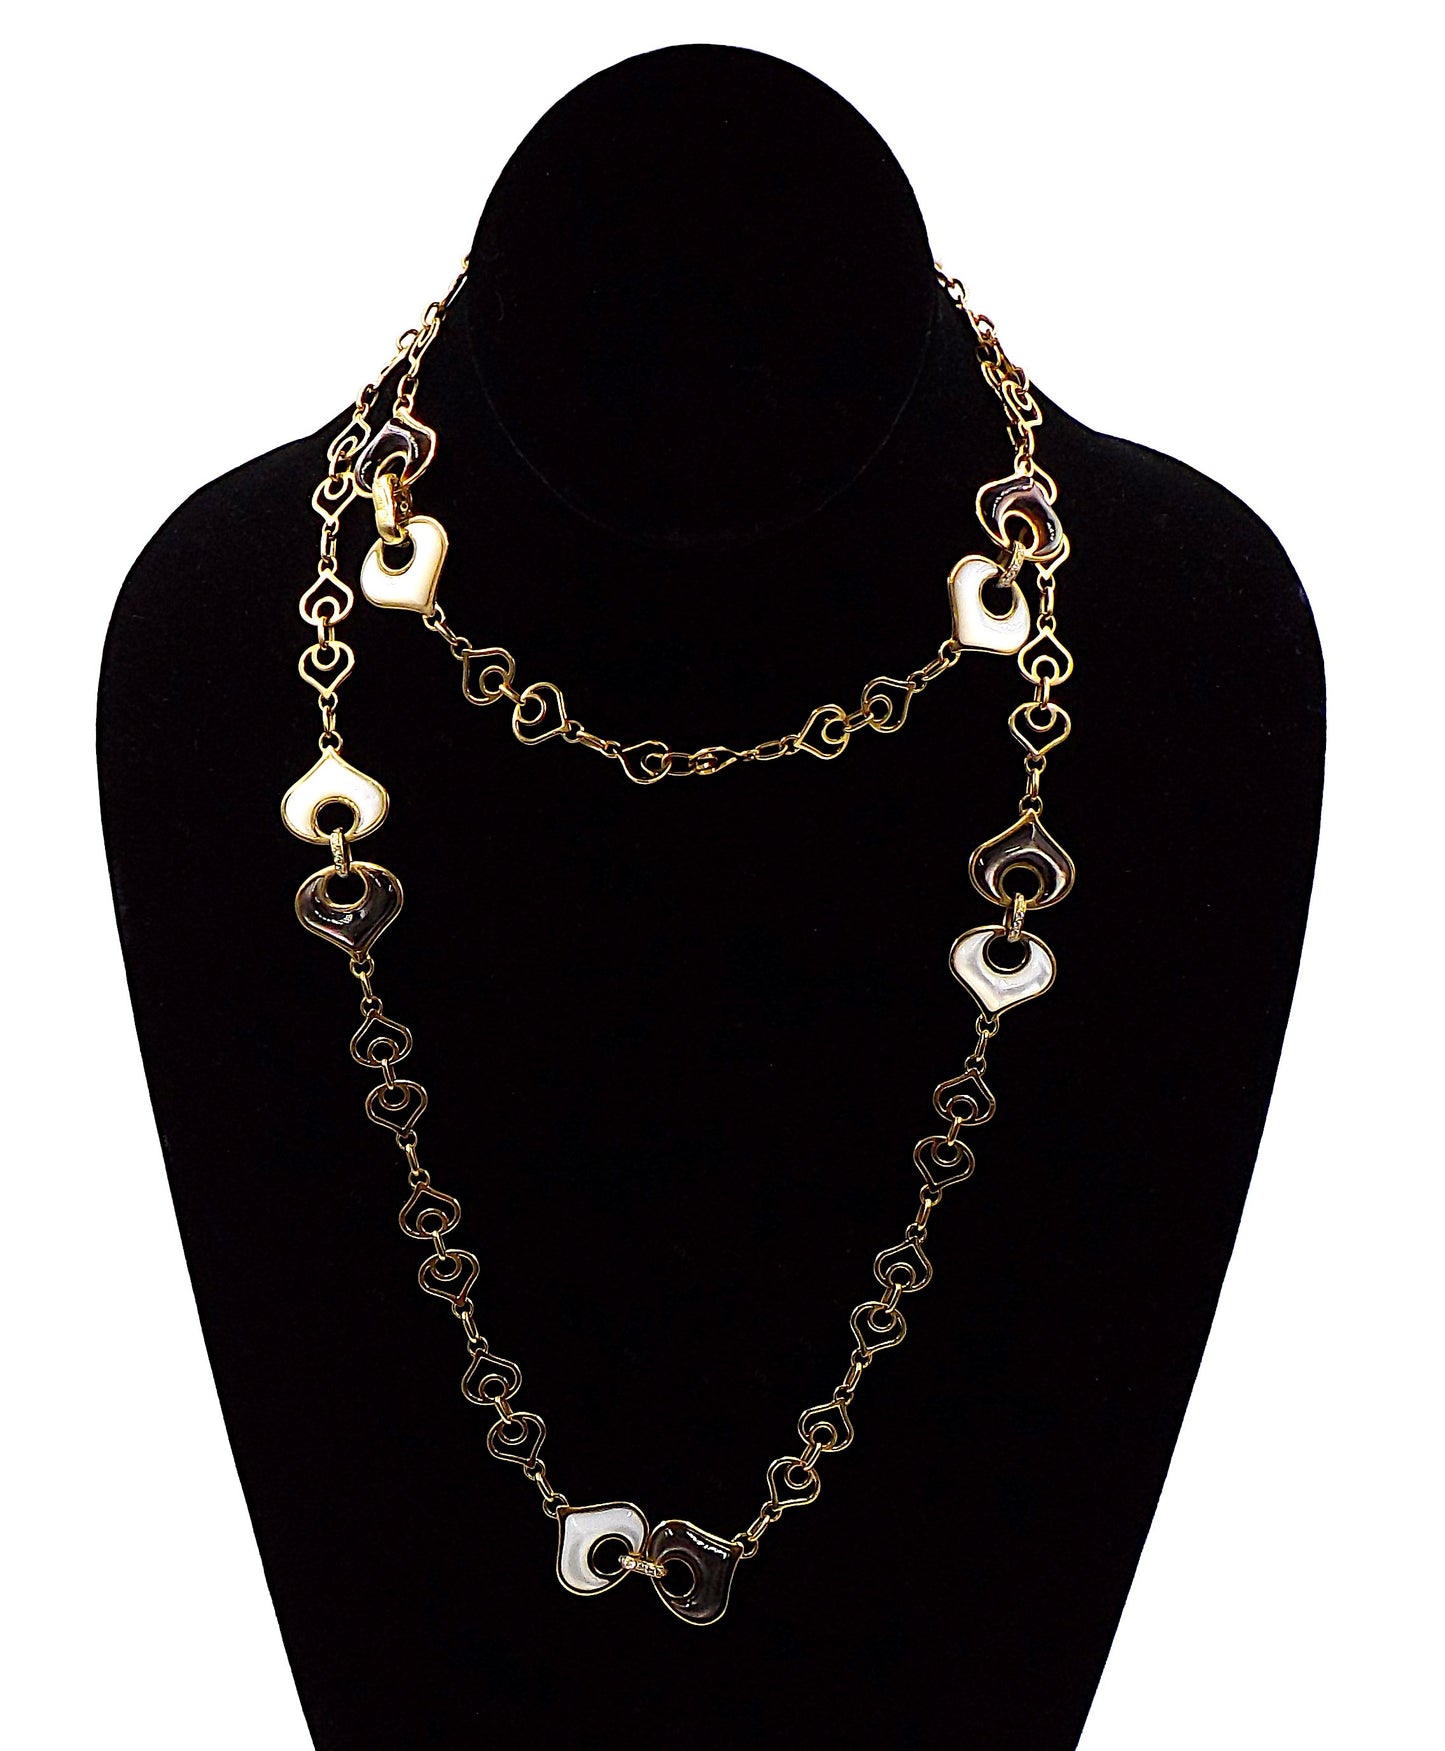 Marina B 18K Yellow Gold Mother of Pearl Diamond Chain Link Necklace